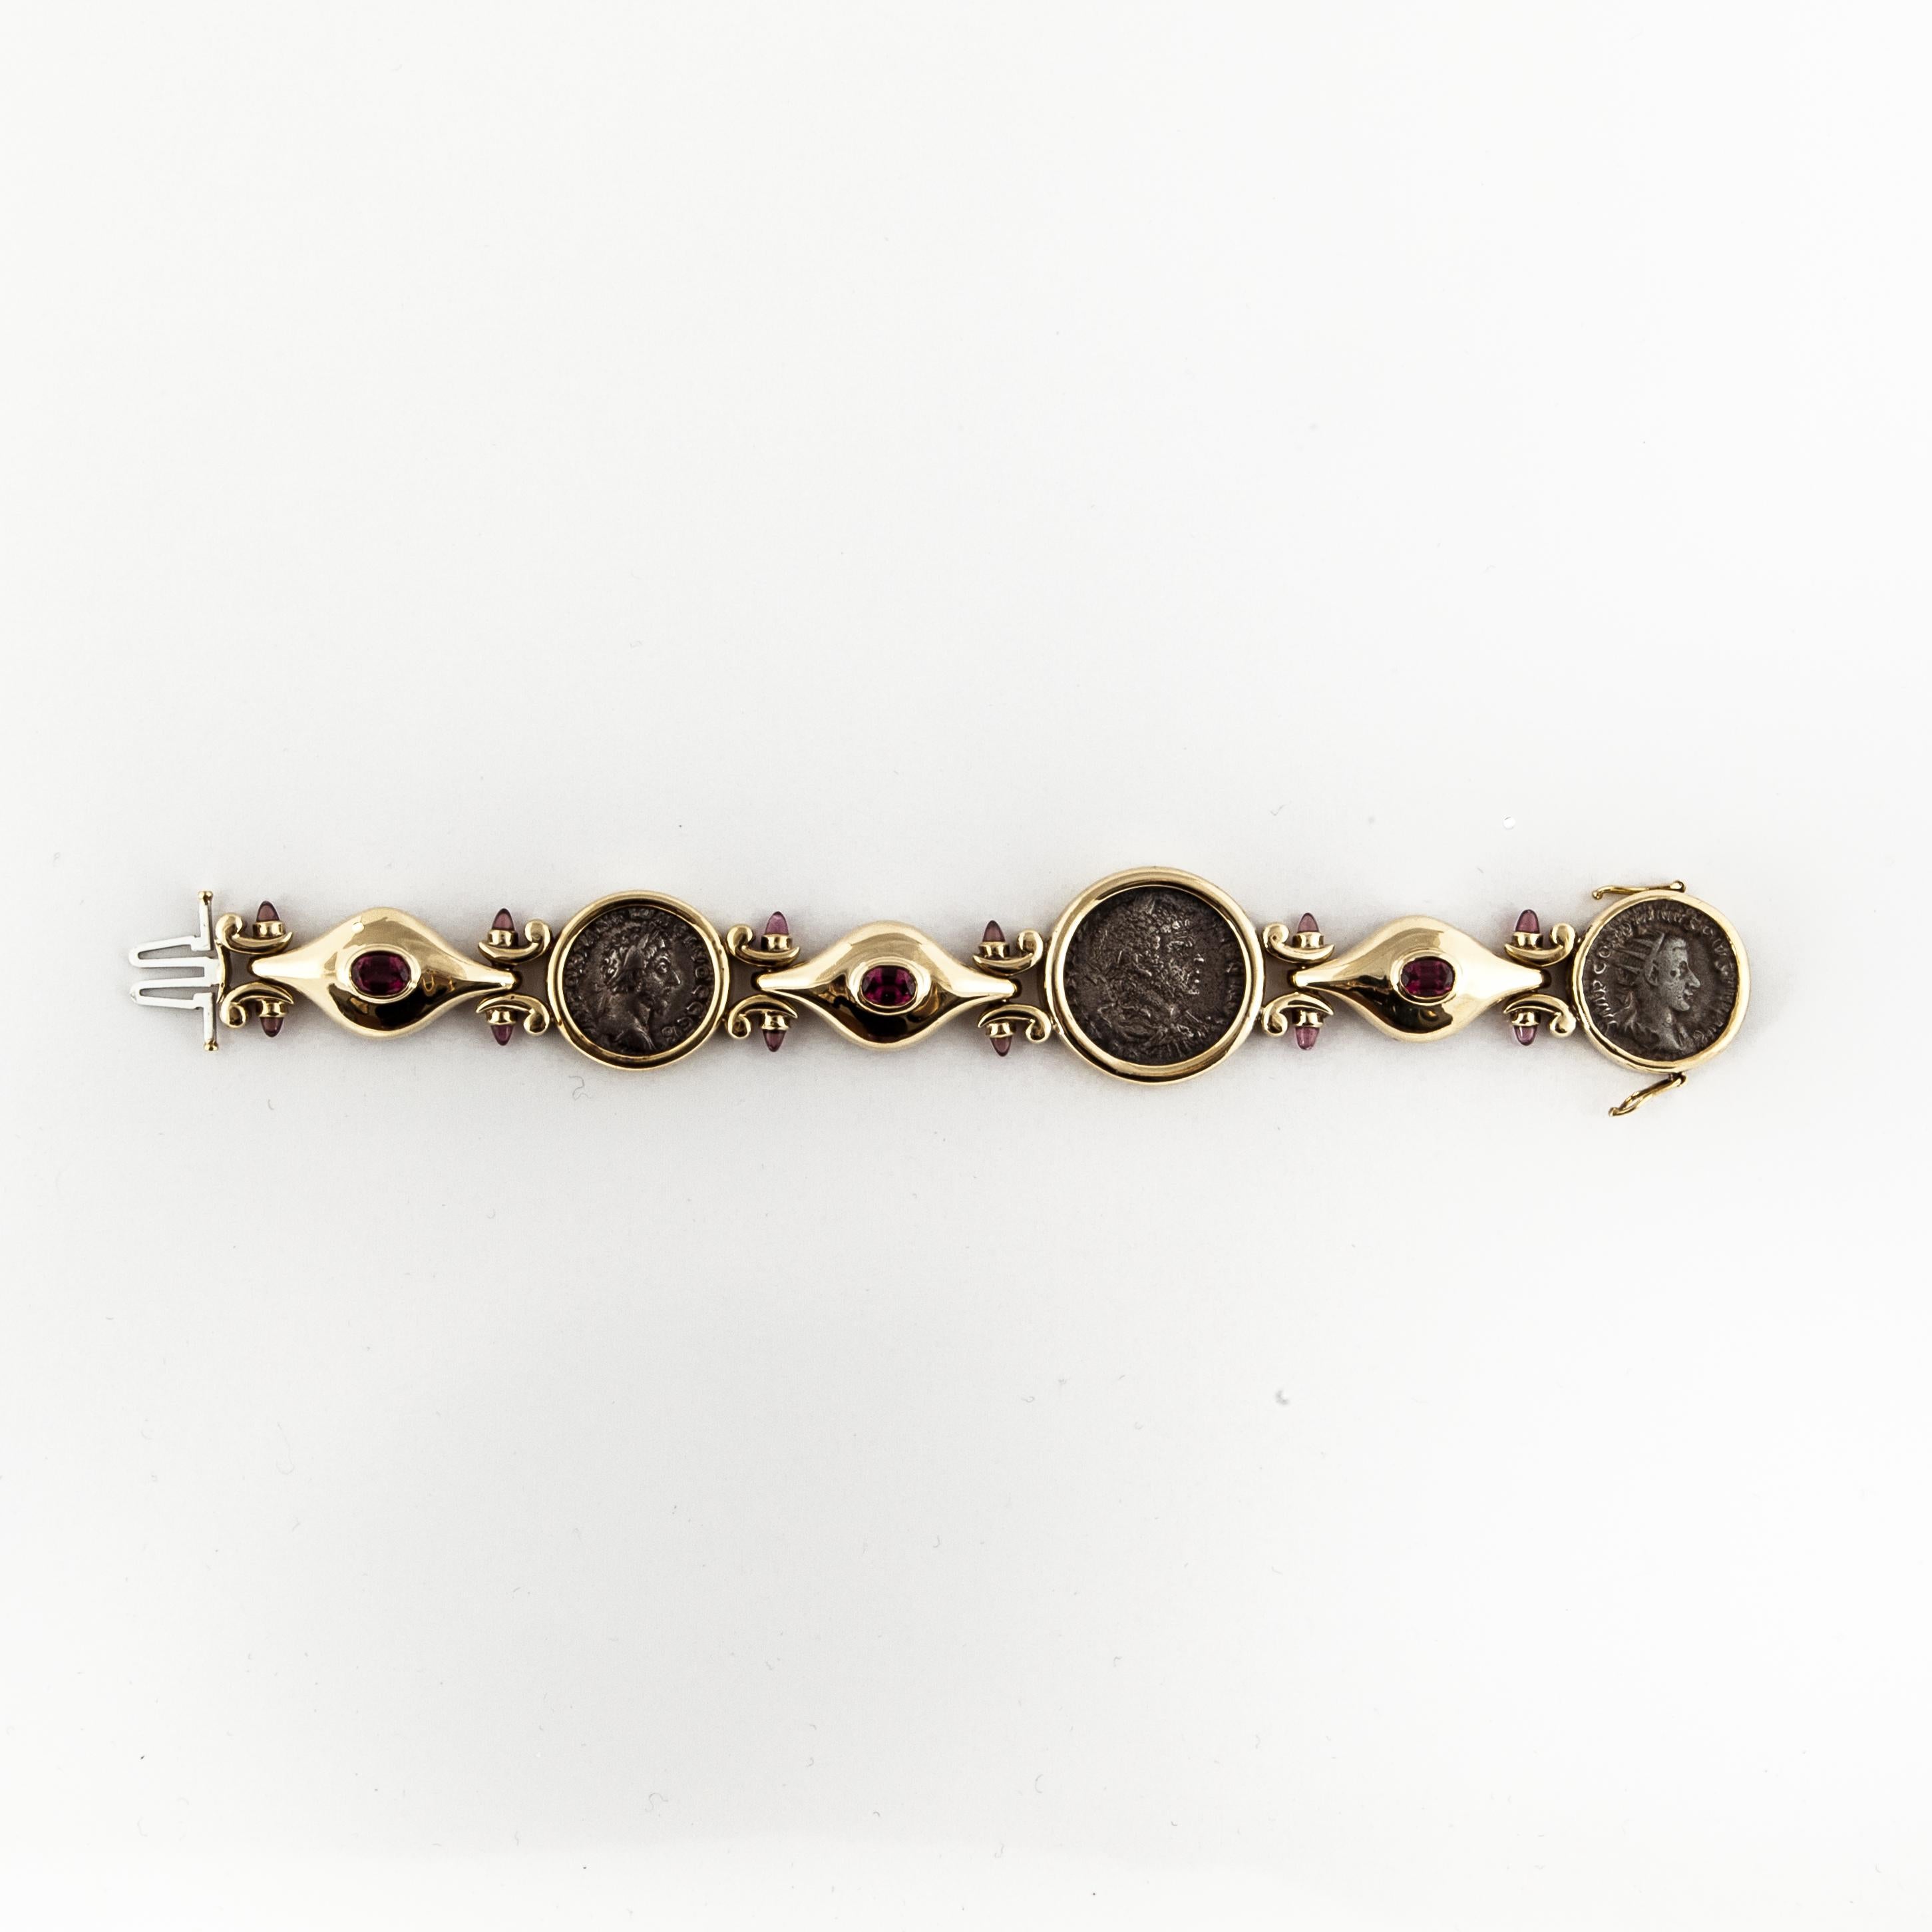 18K yellow gold bracelet featuring ancient Roman and Greek coins.  In addition, there are three oval faceted rubelites and 12 round cabochon rubelites.  The bracelet measures 7 1/2 inches long and 1 1/16 inches at the widest point.  Included are